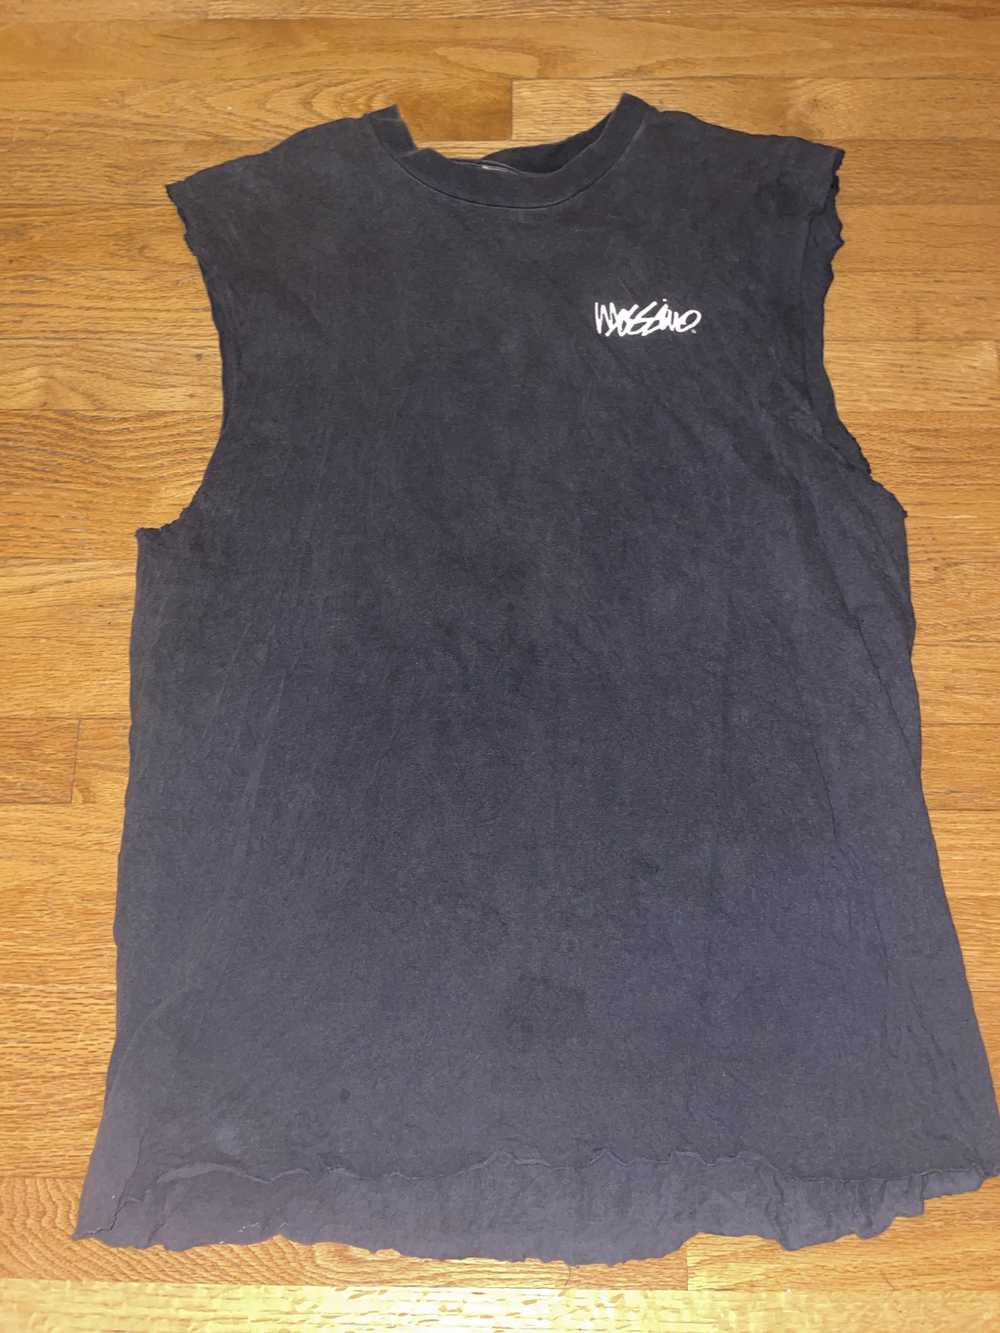 Vintage Late 80s/Early 90s Mossimo Chopped Tee - image 1